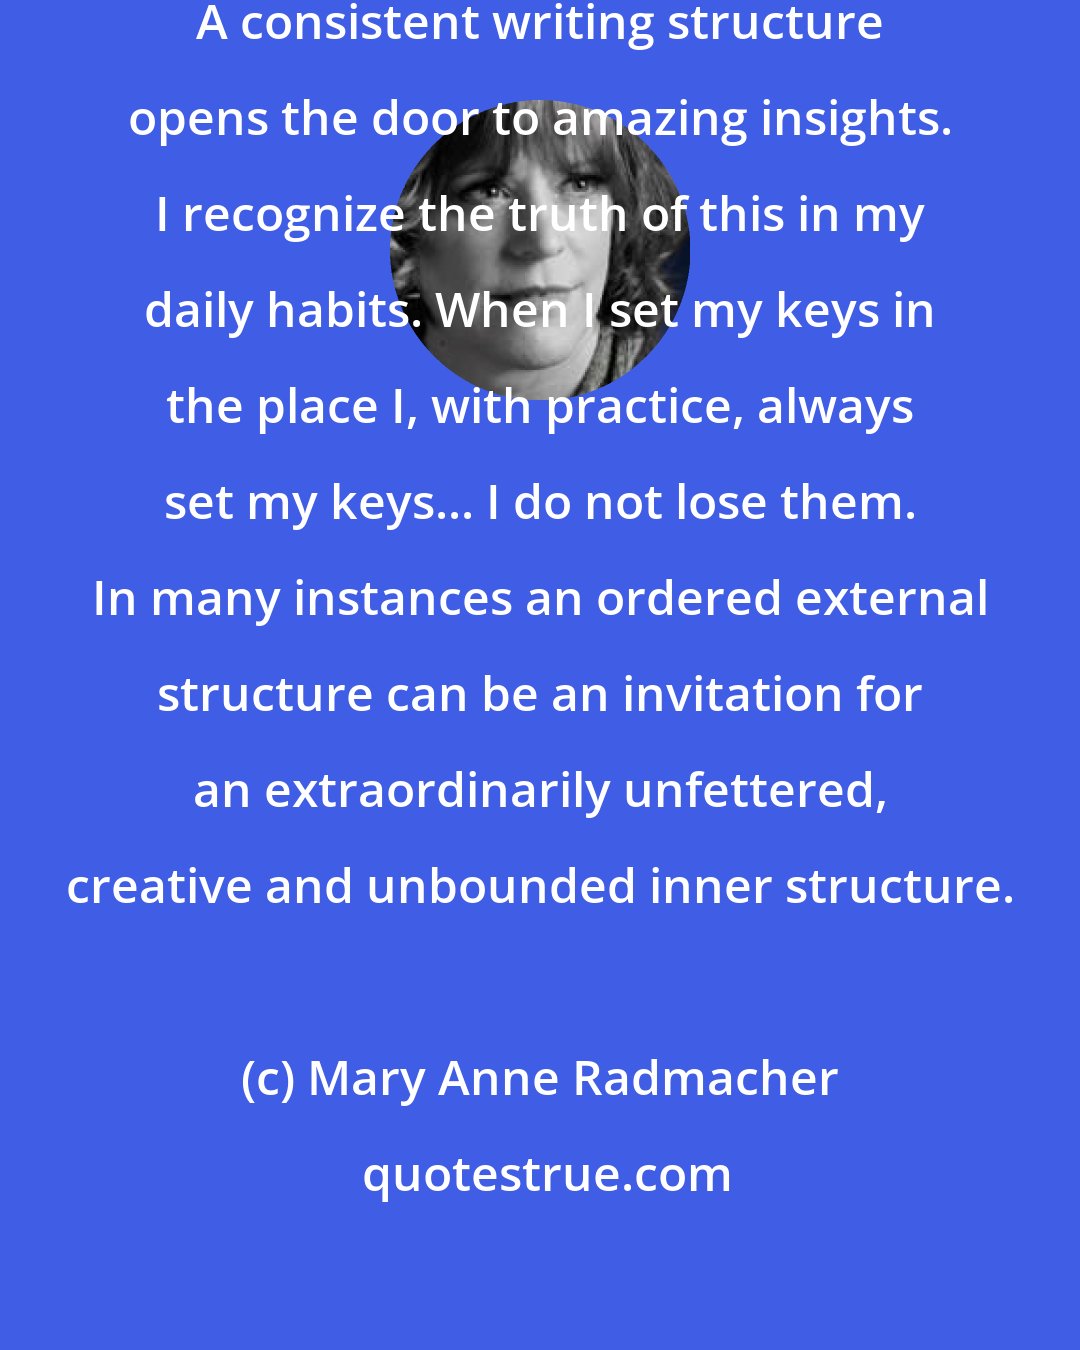 Mary Anne Radmacher: I recognize this in my writing process. A consistent writing structure opens the door to amazing insights. I recognize the truth of this in my daily habits. When I set my keys in the place I, with practice, always set my keys... I do not lose them. In many instances an ordered external structure can be an invitation for an extraordinarily unfettered, creative and unbounded inner structure.